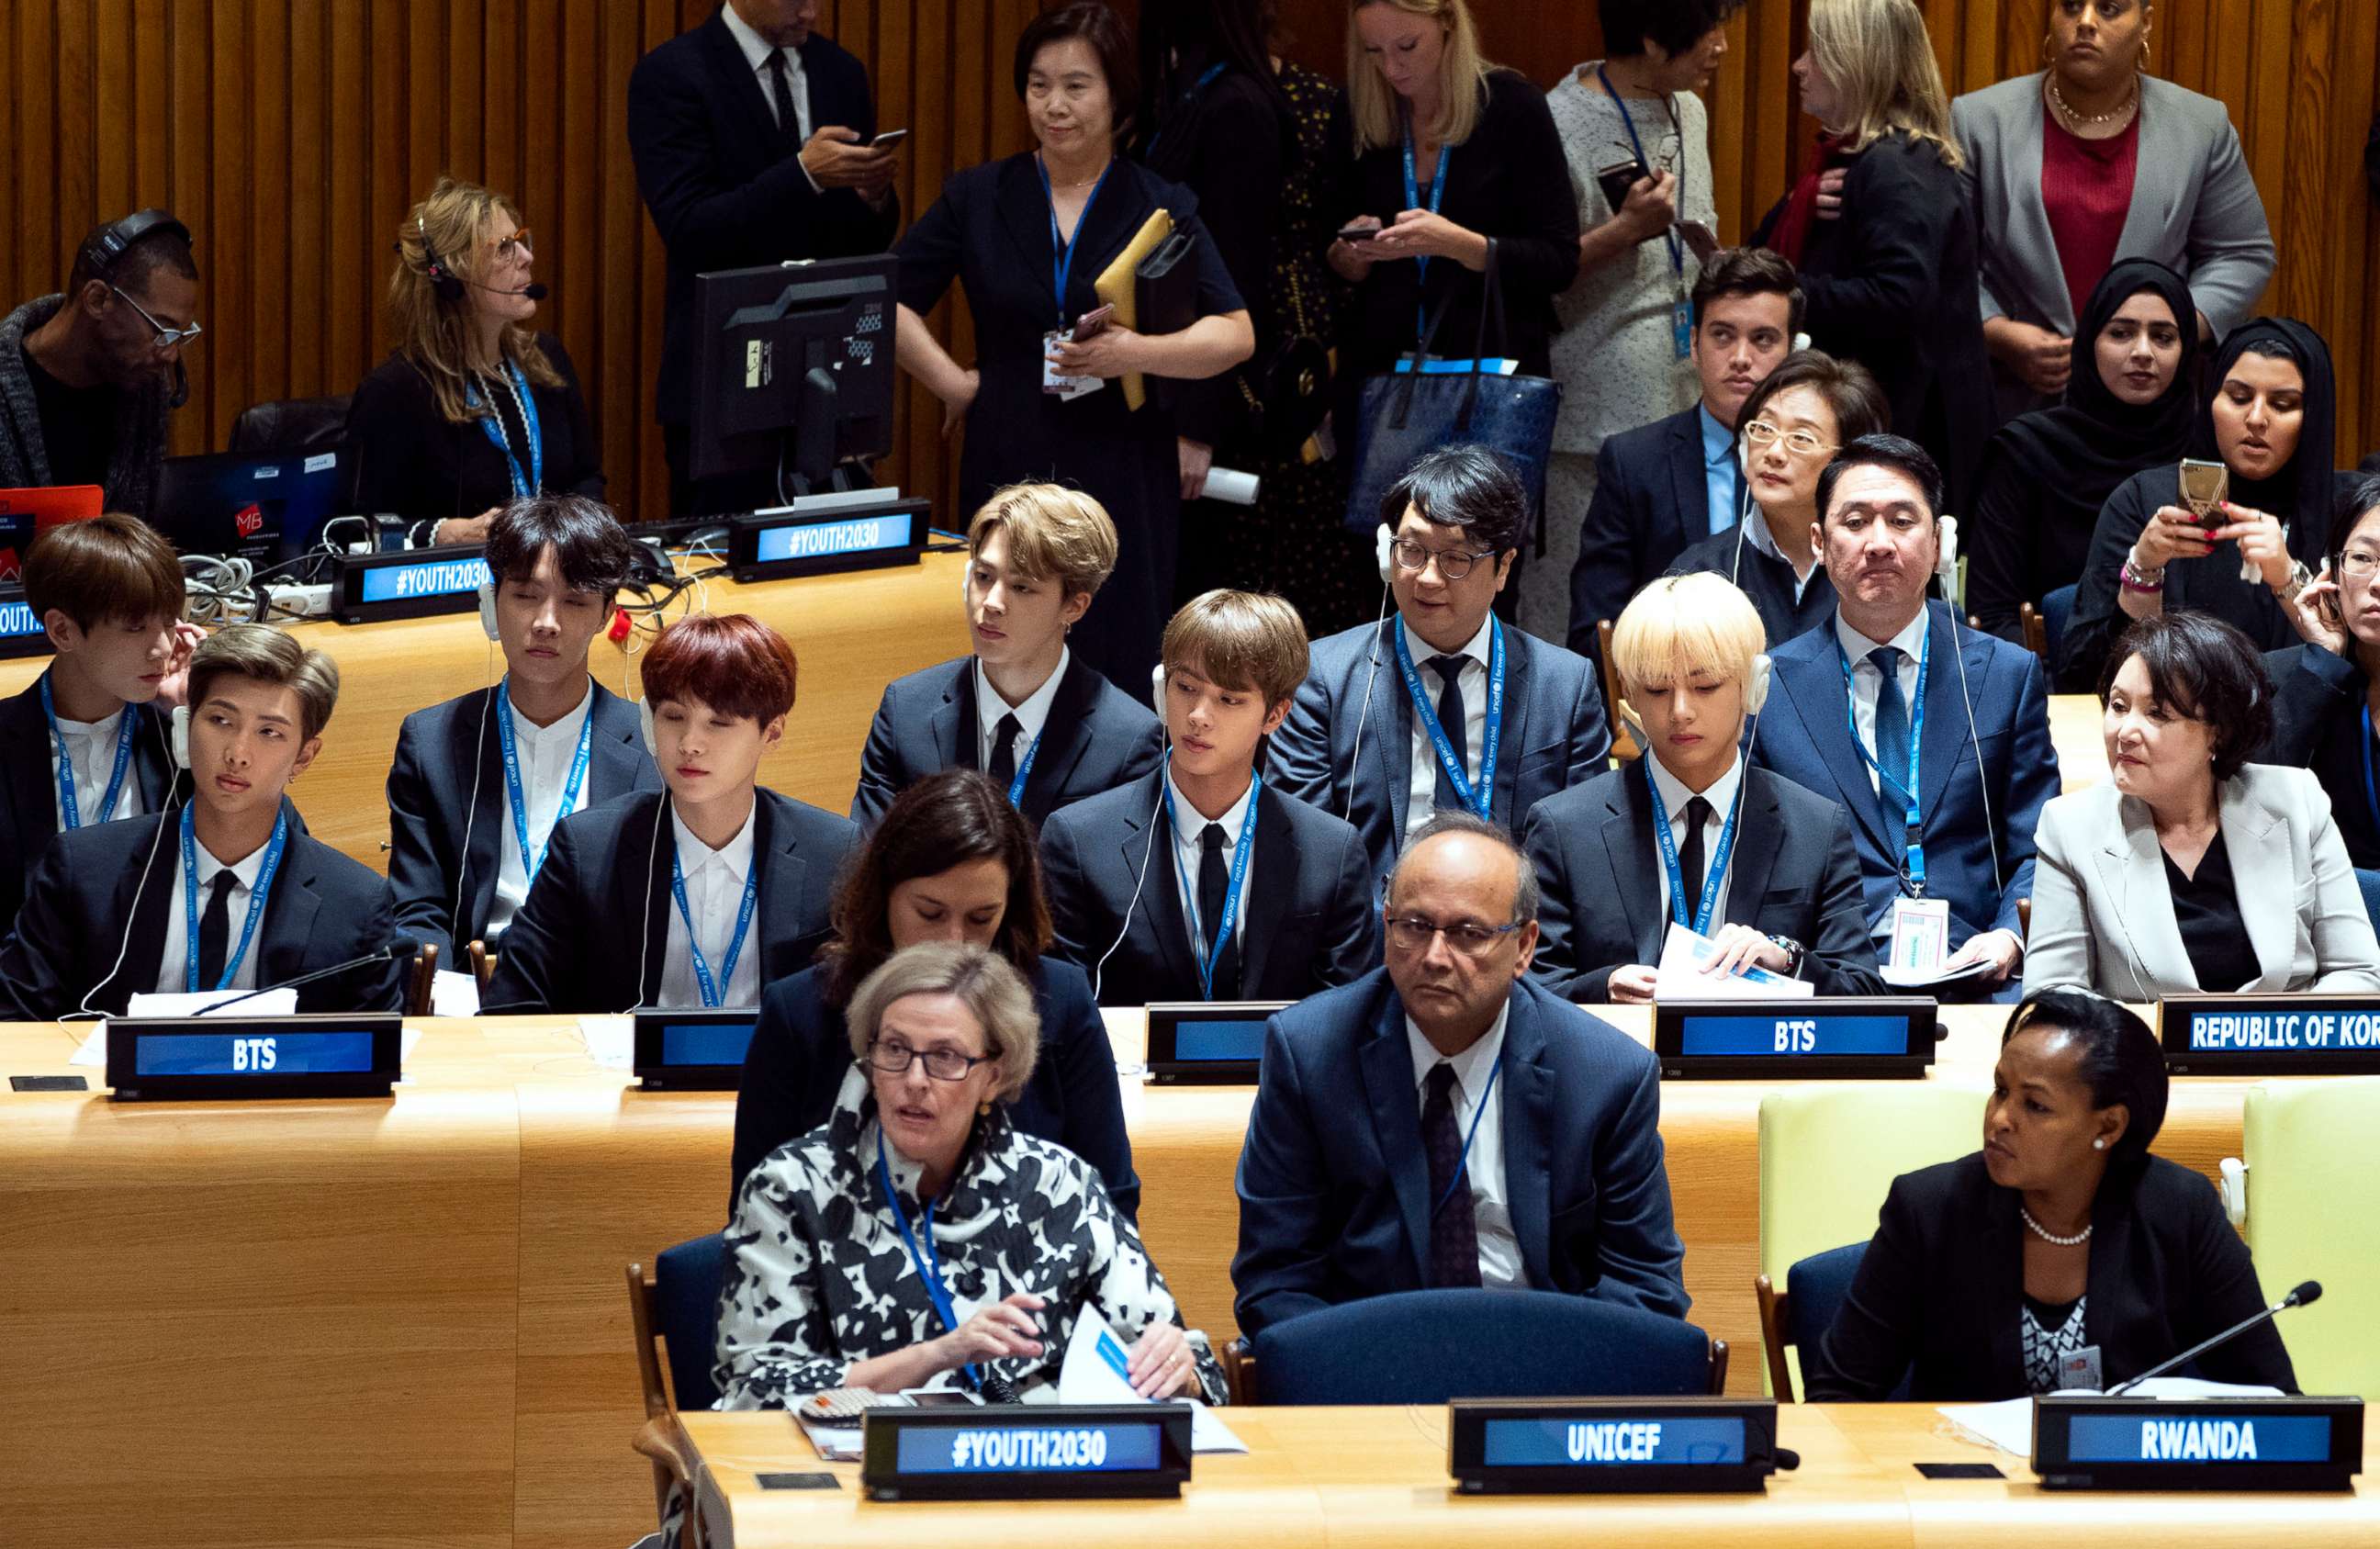 PHOTO: Members of the Korean K-Pop group BTS, center row, attend a meeting at the U.N. high level event regarding youth during the 73rd session of the United Nations General Assembly, at U.N. headquarters, Sept. 24, 2018.